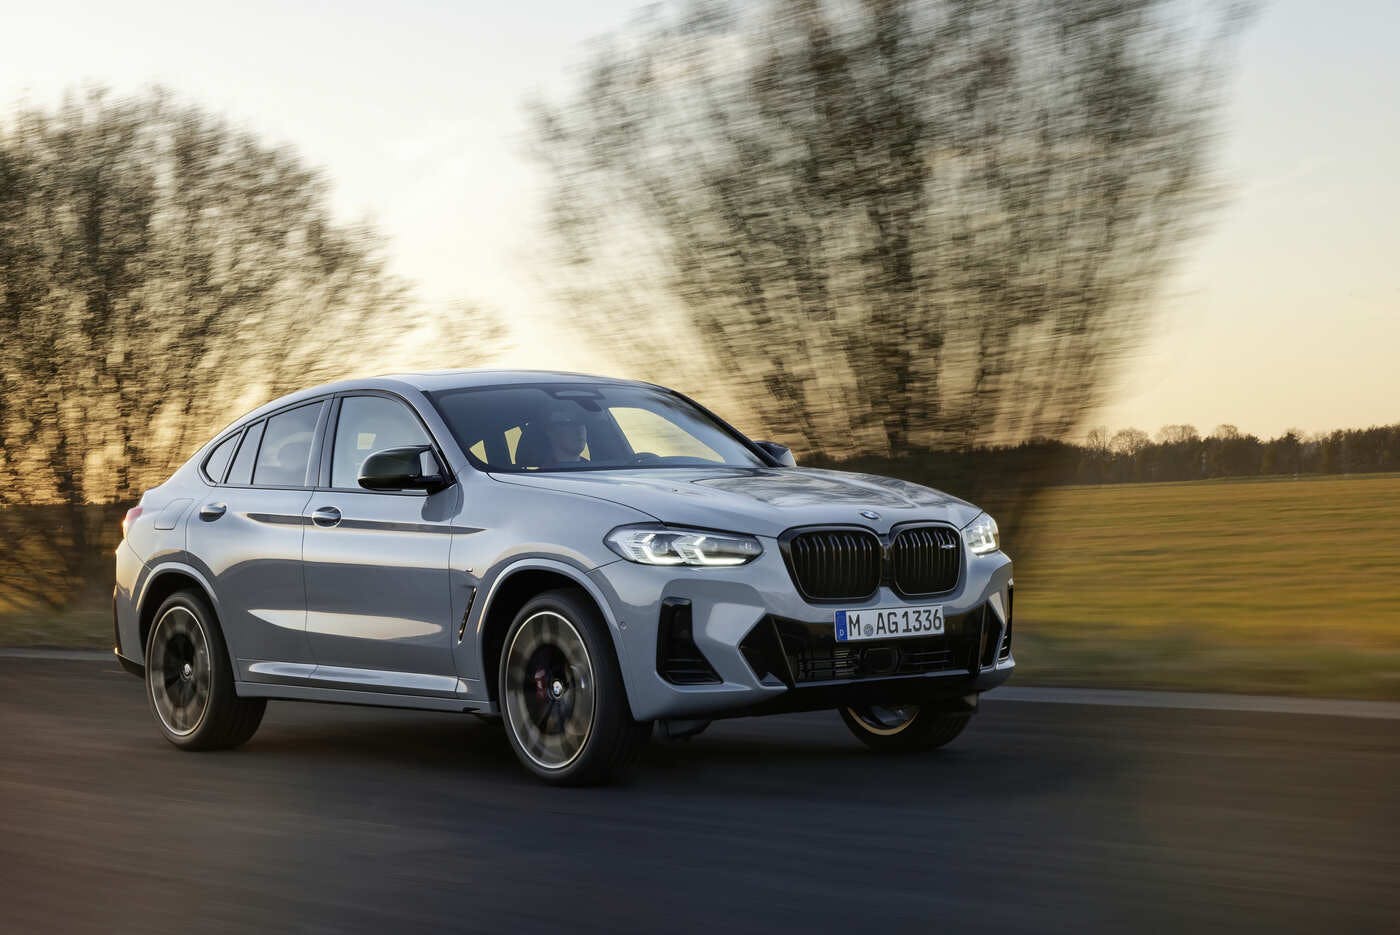 BMW X4 2014-2015-2016-2017-2018-2019-2020 Review